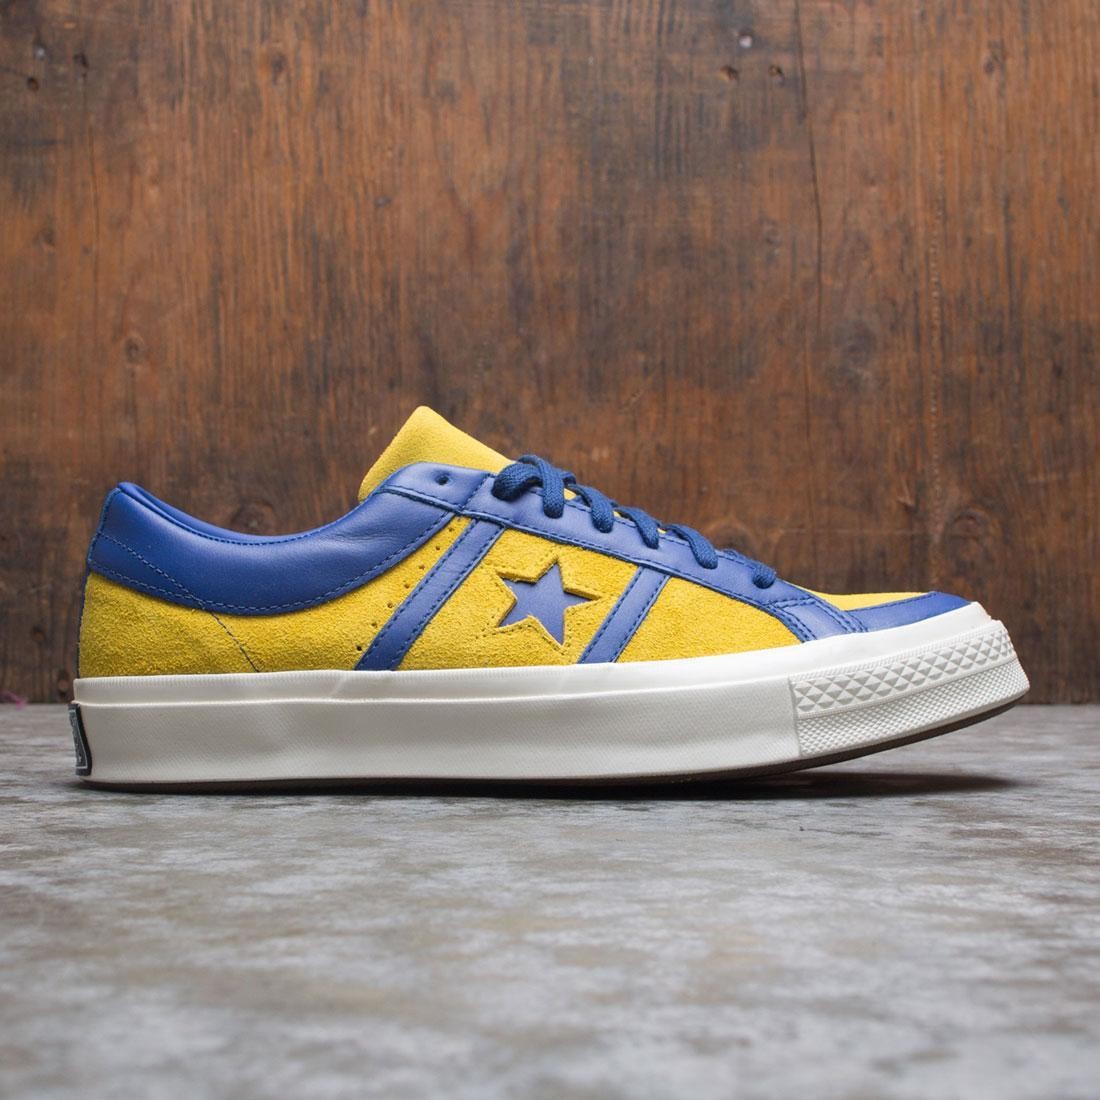 converse one star yellow